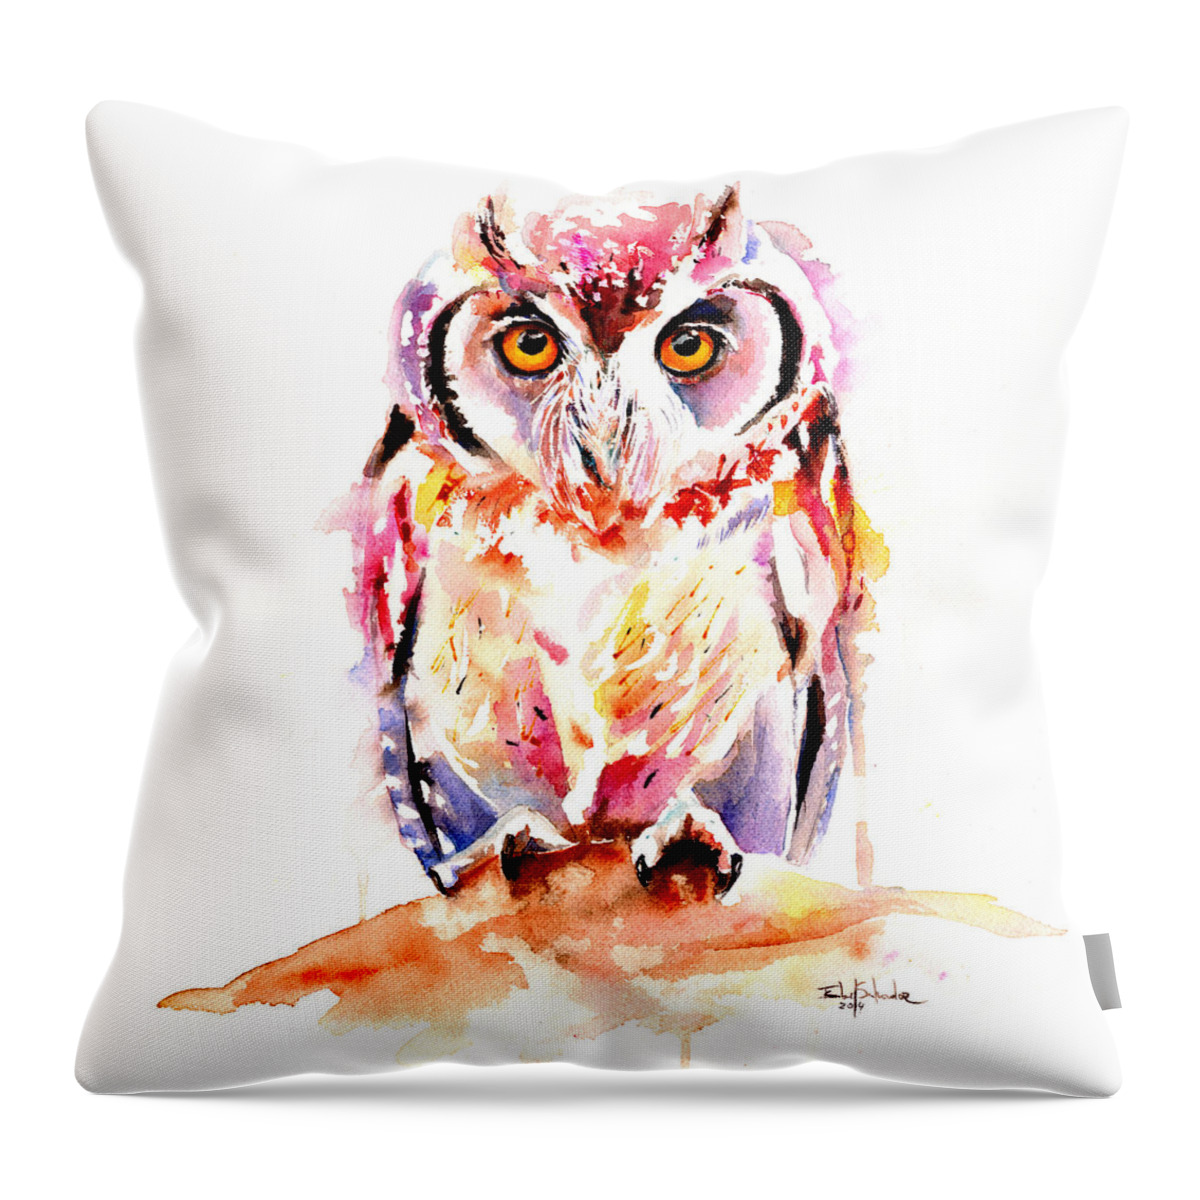 Painting Throw Pillow featuring the painting Little Owl by Isabel Salvador